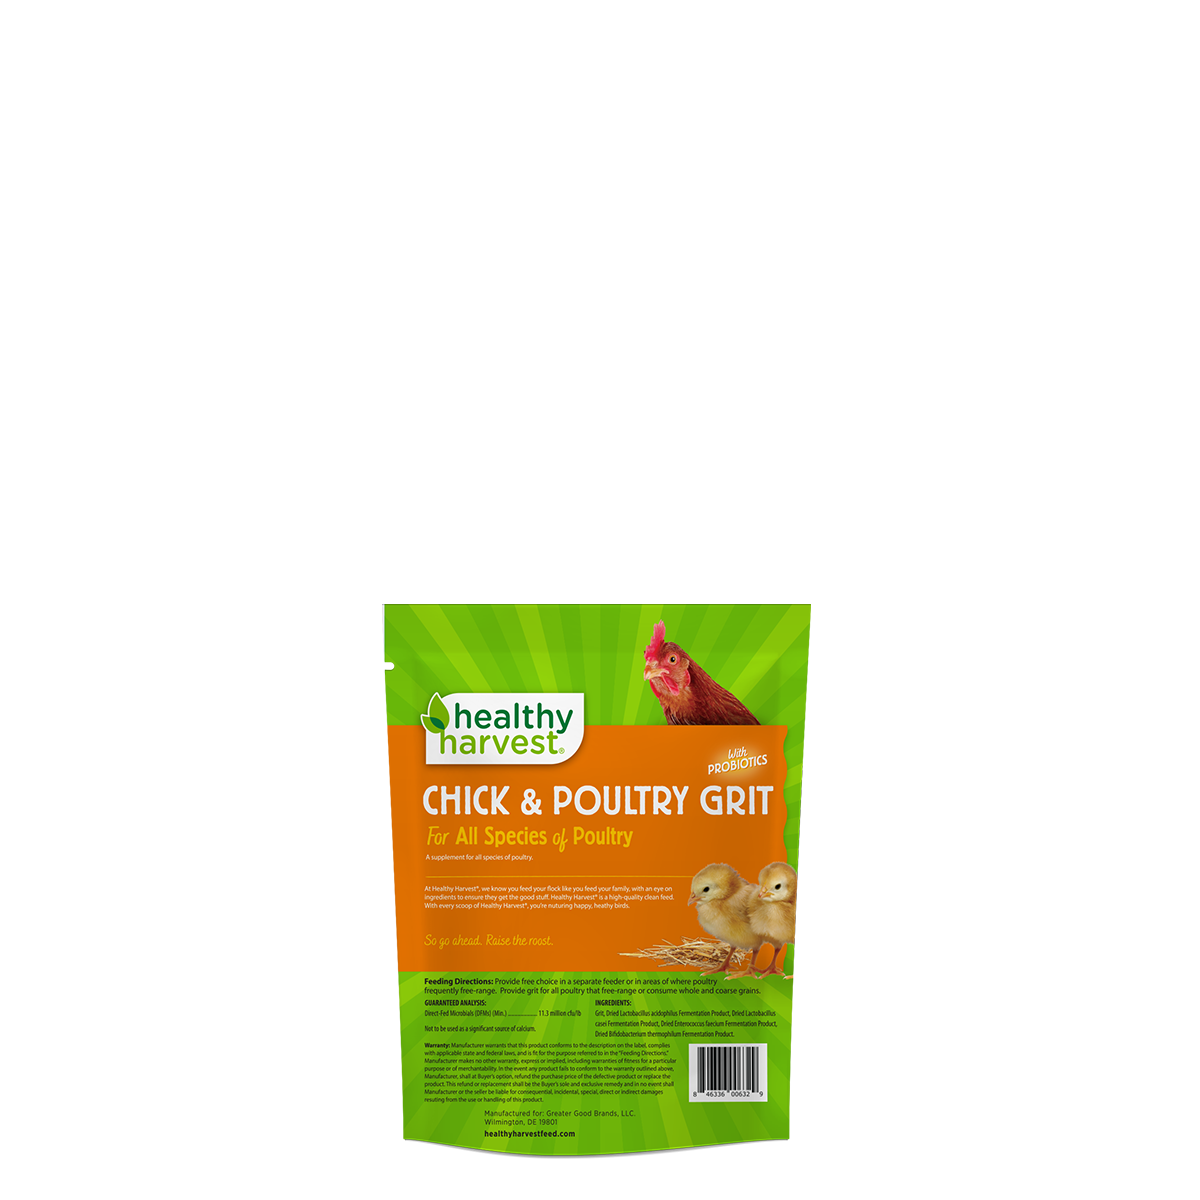 Chick and Poultry Grit 5 lb Bag